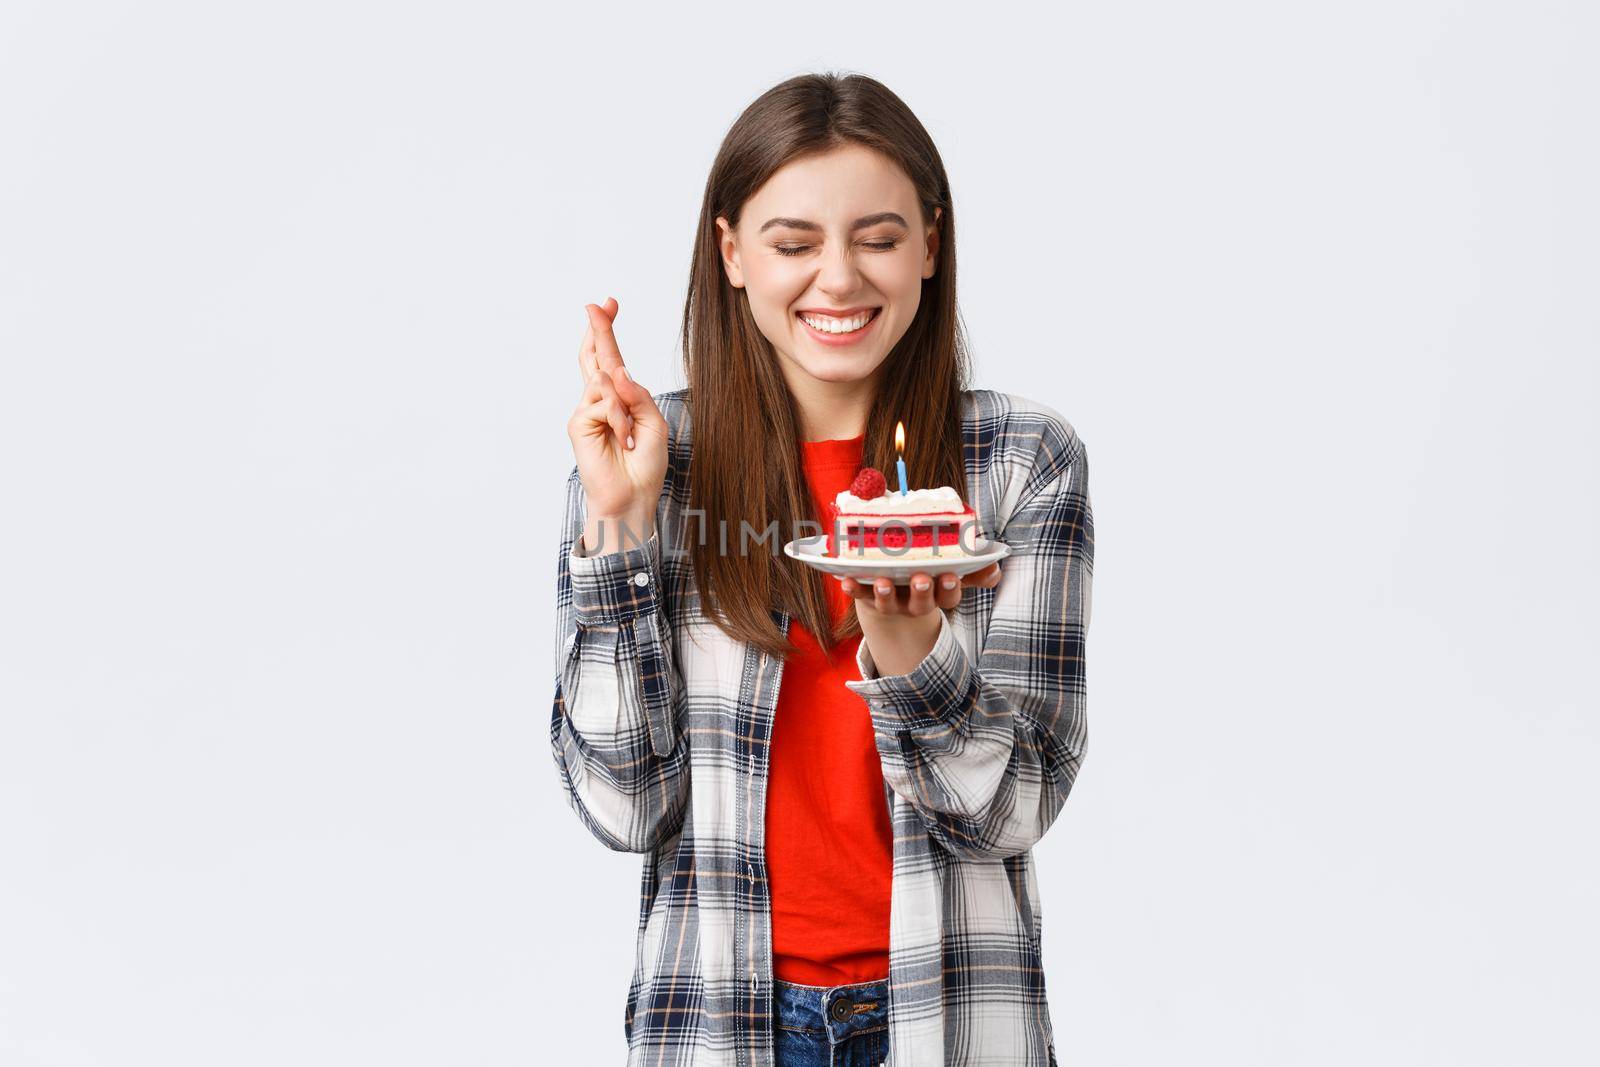 People lifestyle, holidays and celebration, emotions concept. Happy, cheerful b-day girl celebrating, close eyes cross fingers as blowing candle to make wish on birthday cake.